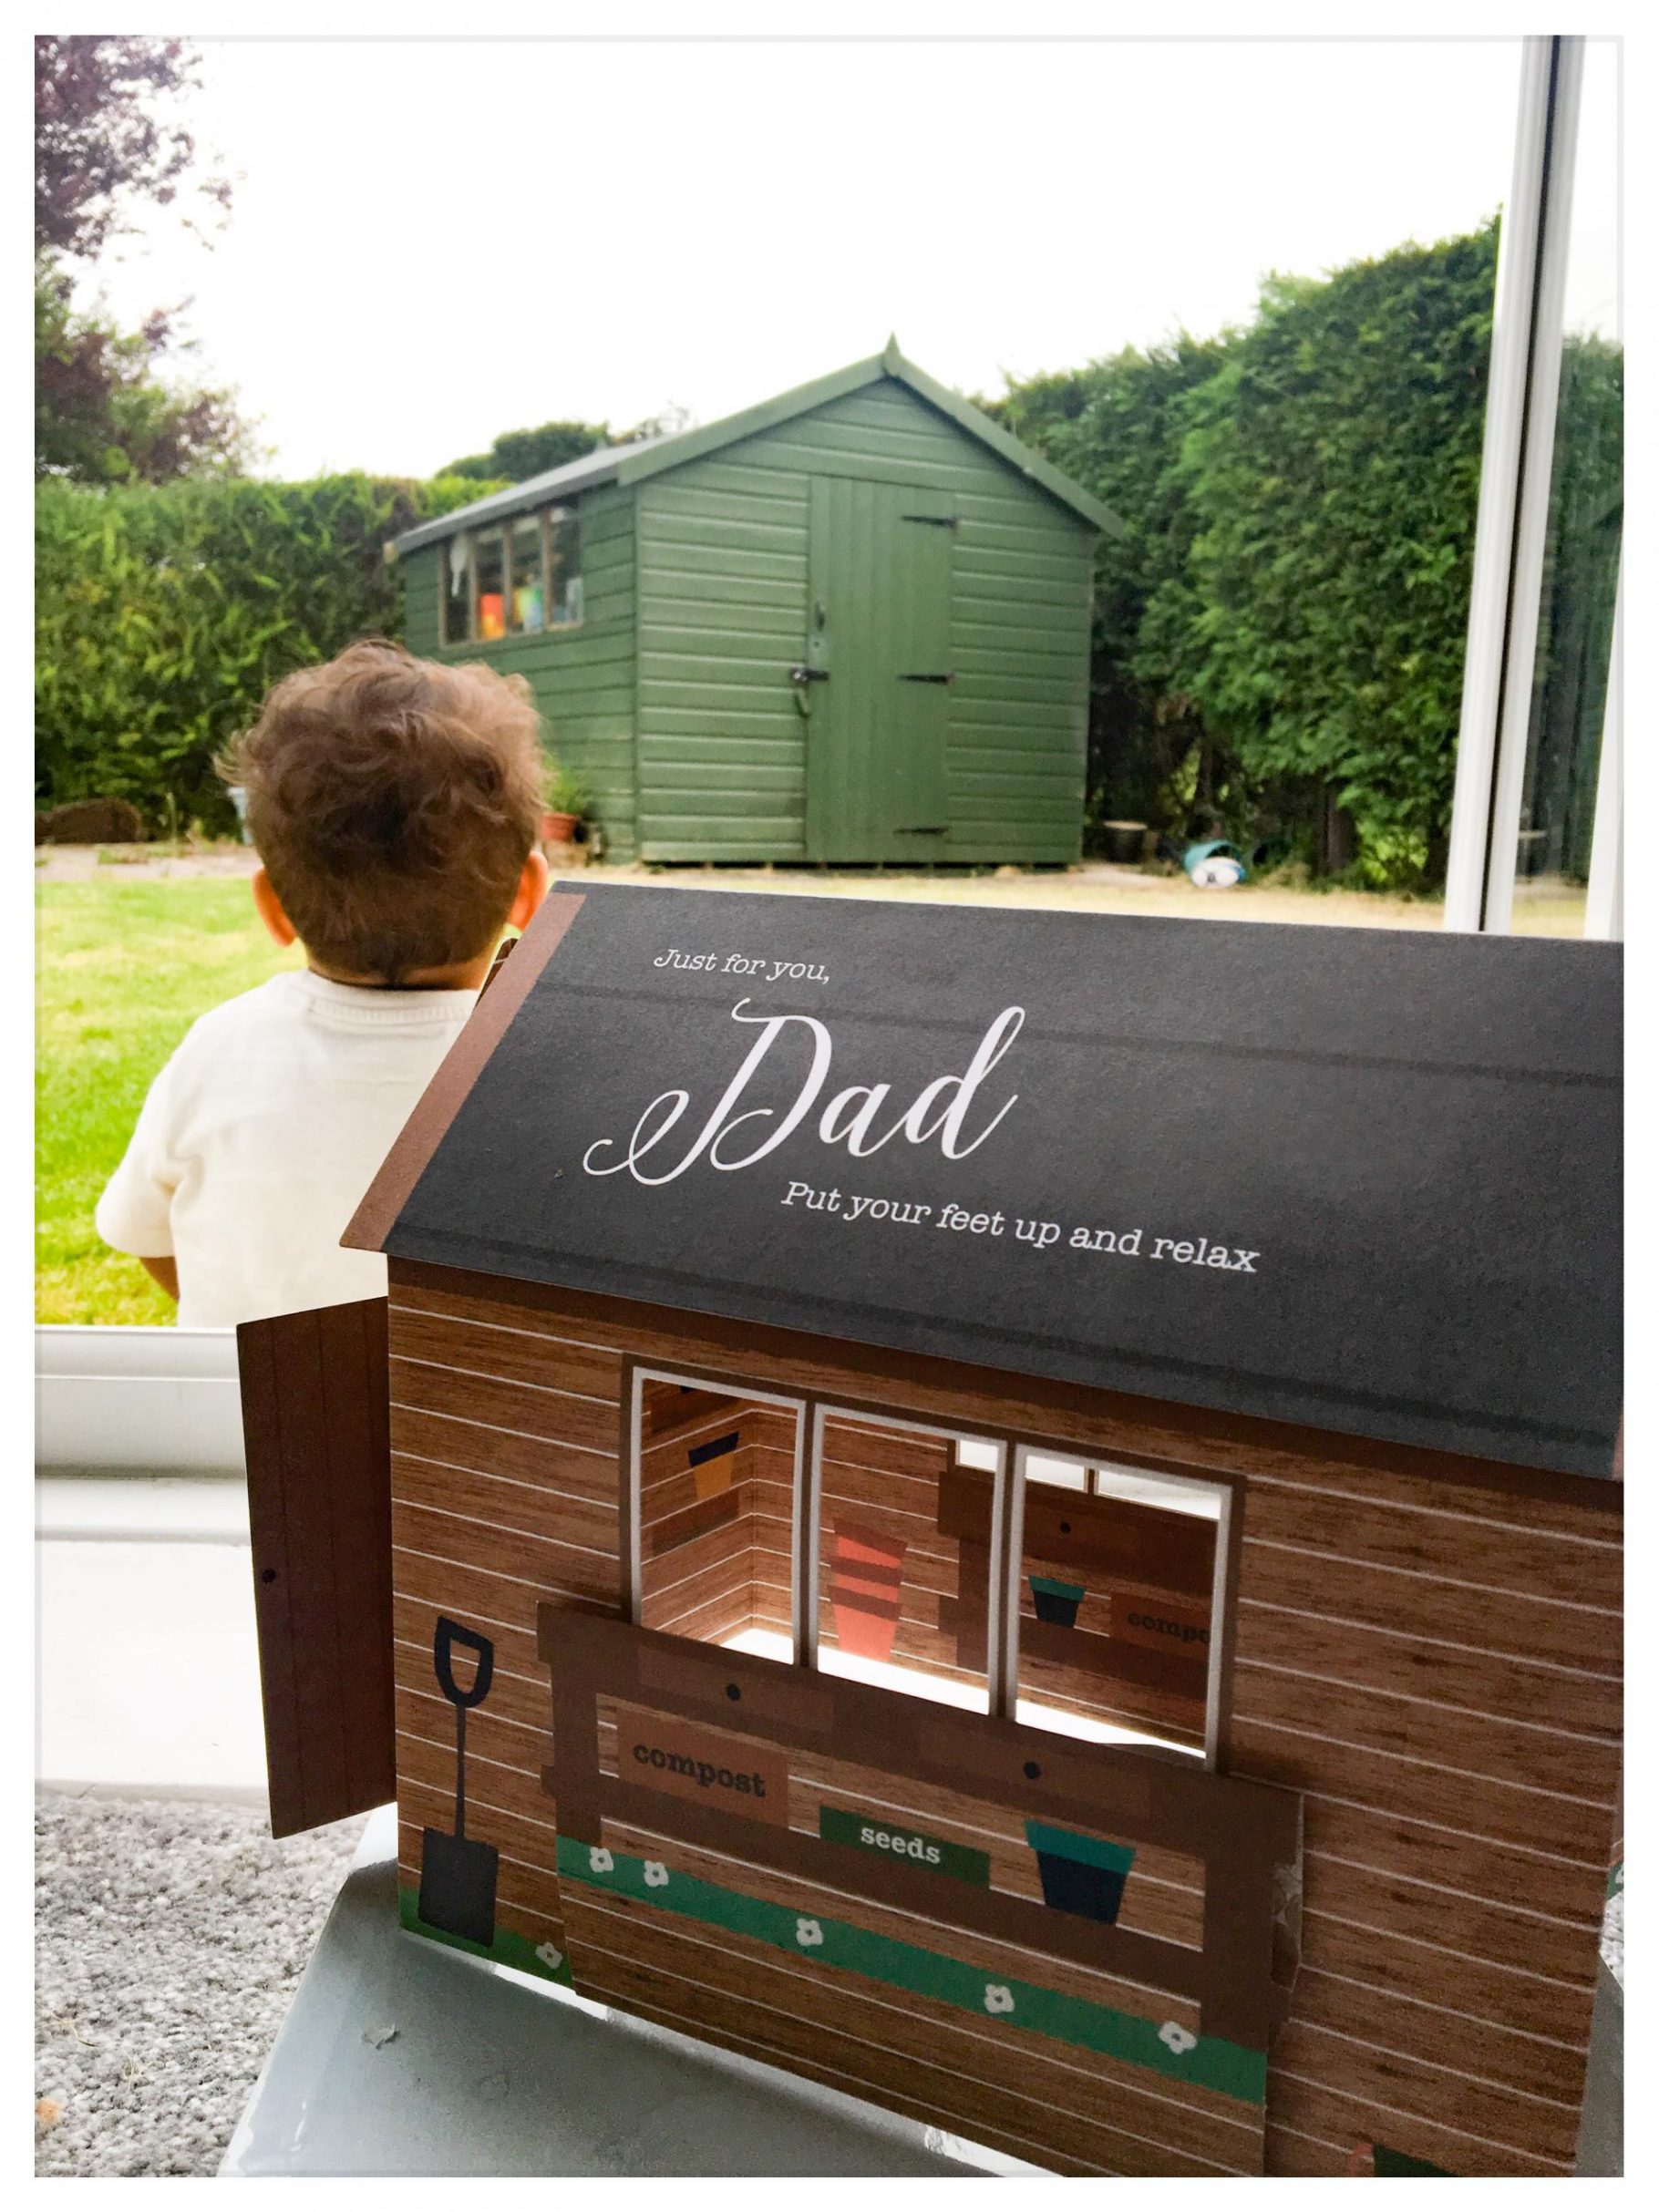 5 Reasons Hallmark and Tesco have your gifts for dad wrapped up